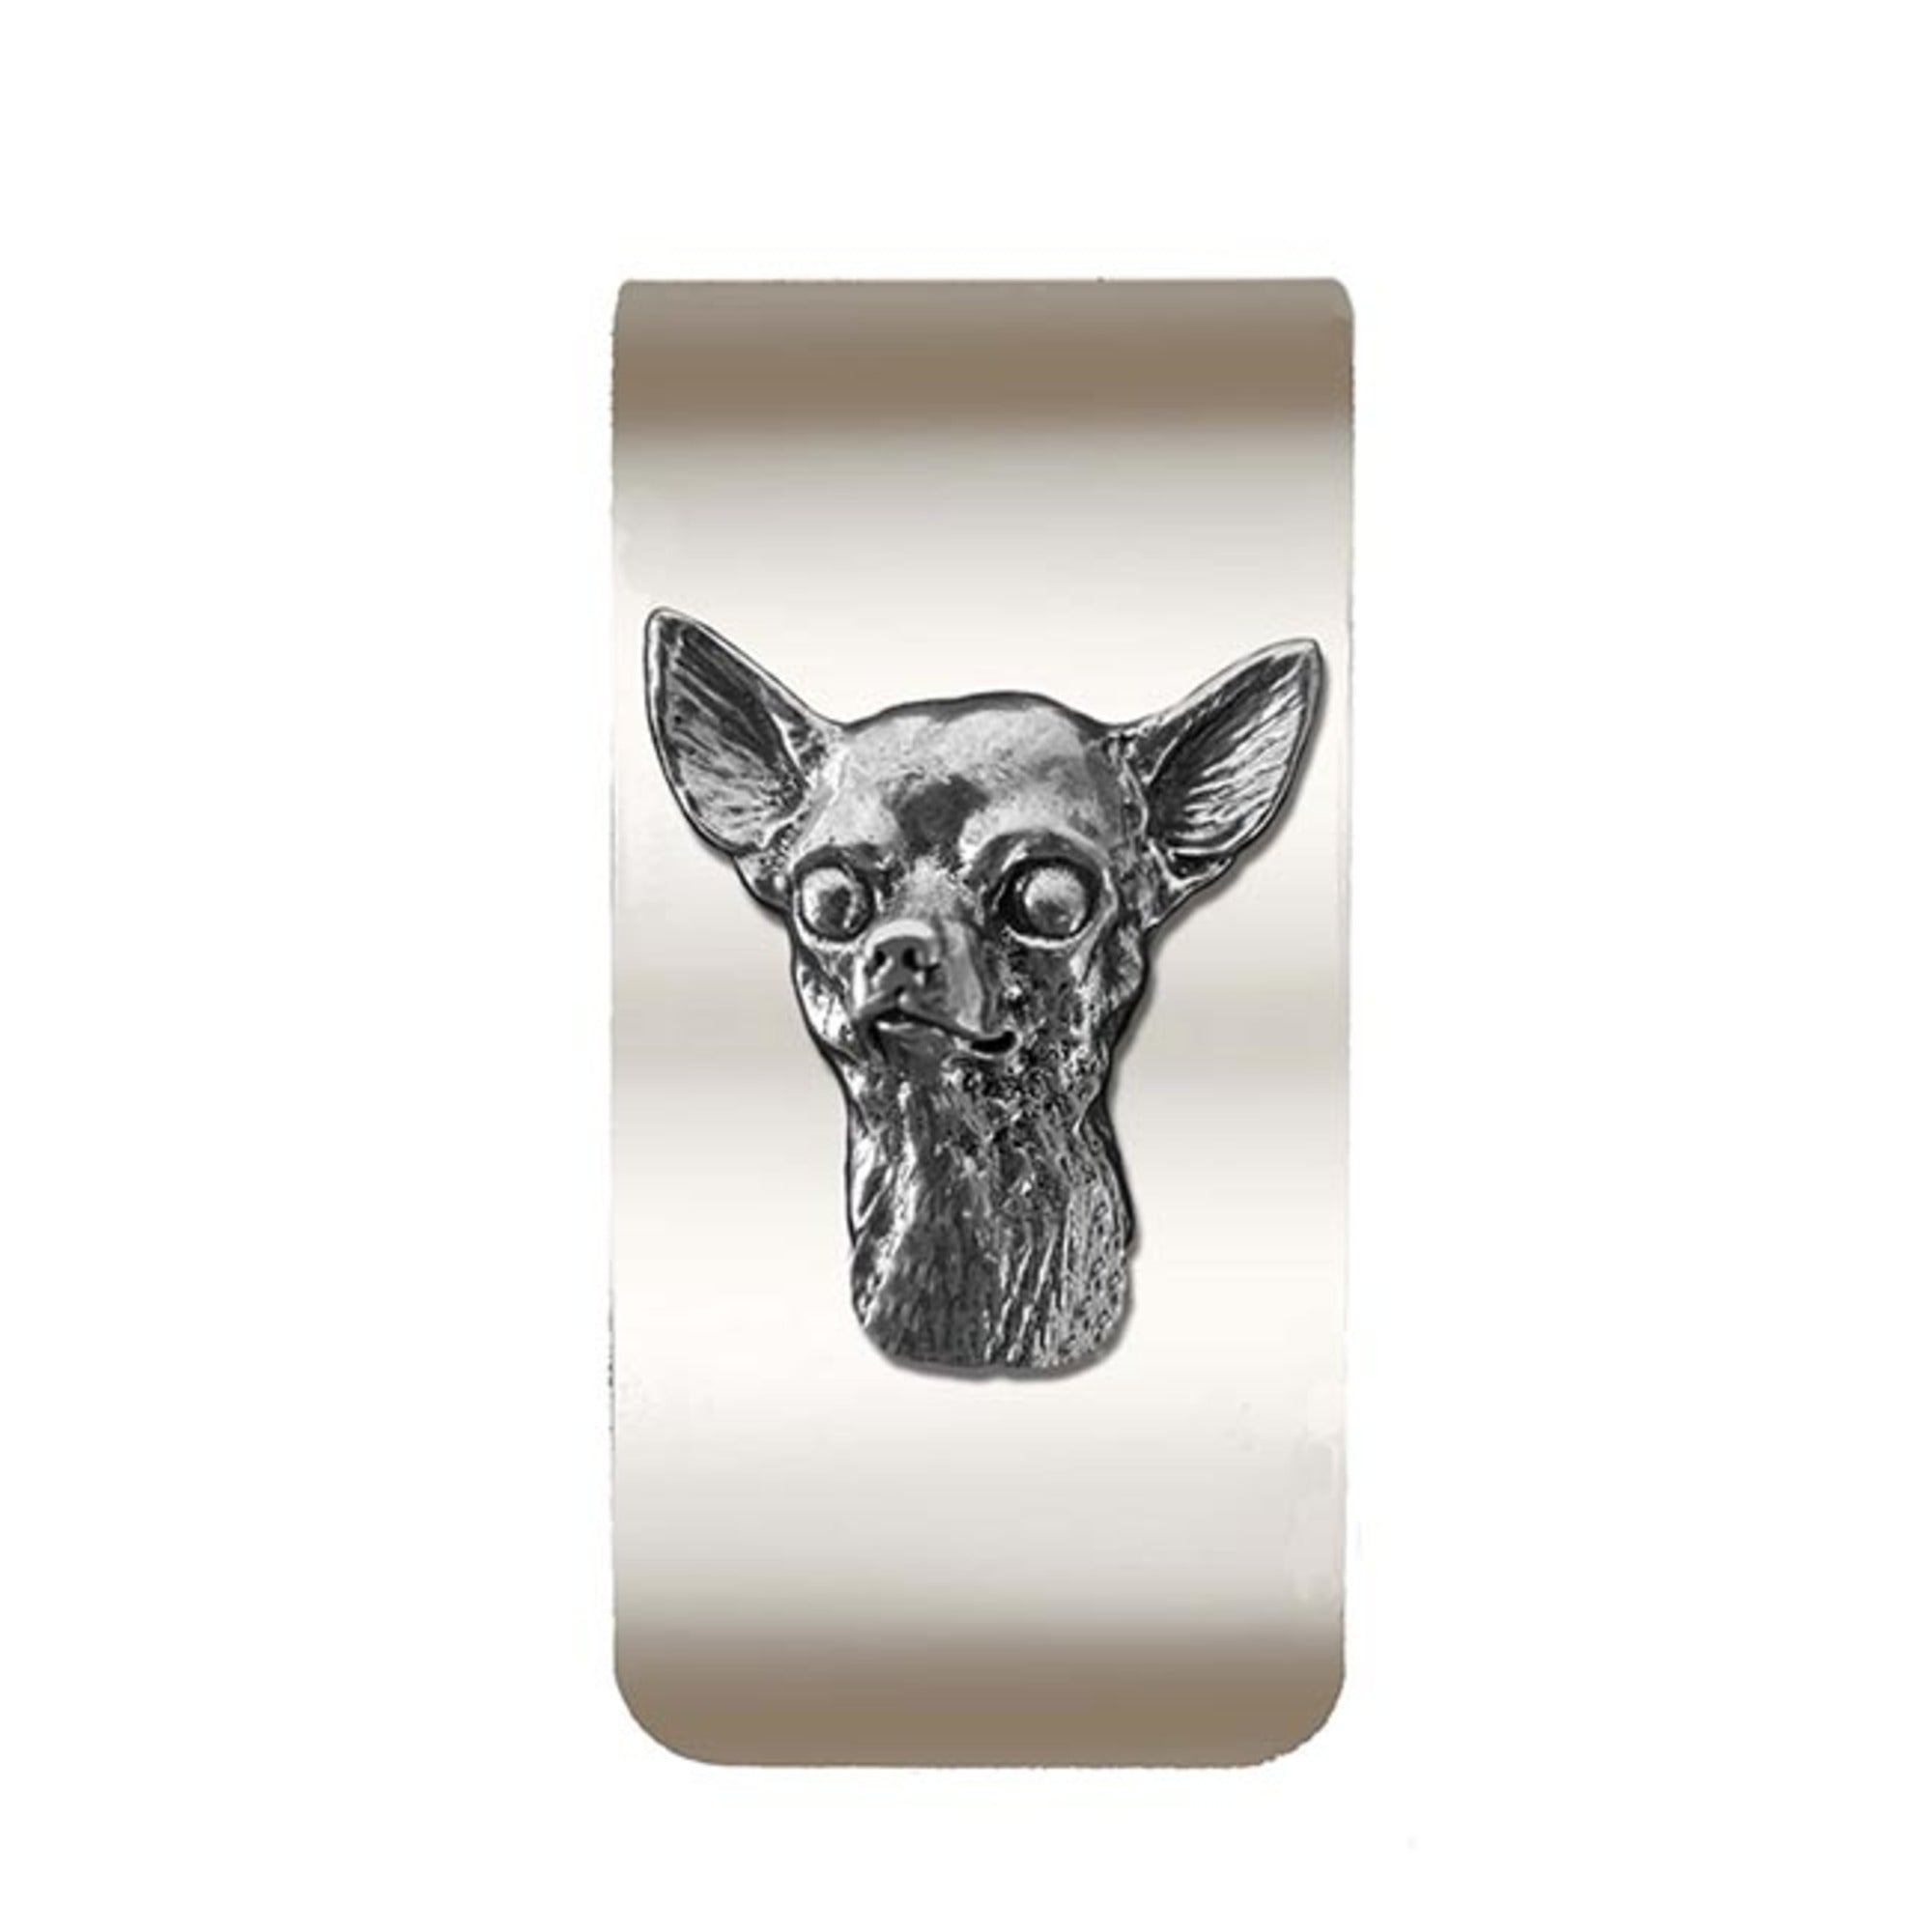 New-Spin Metal Casting Chihuahua Money Clip